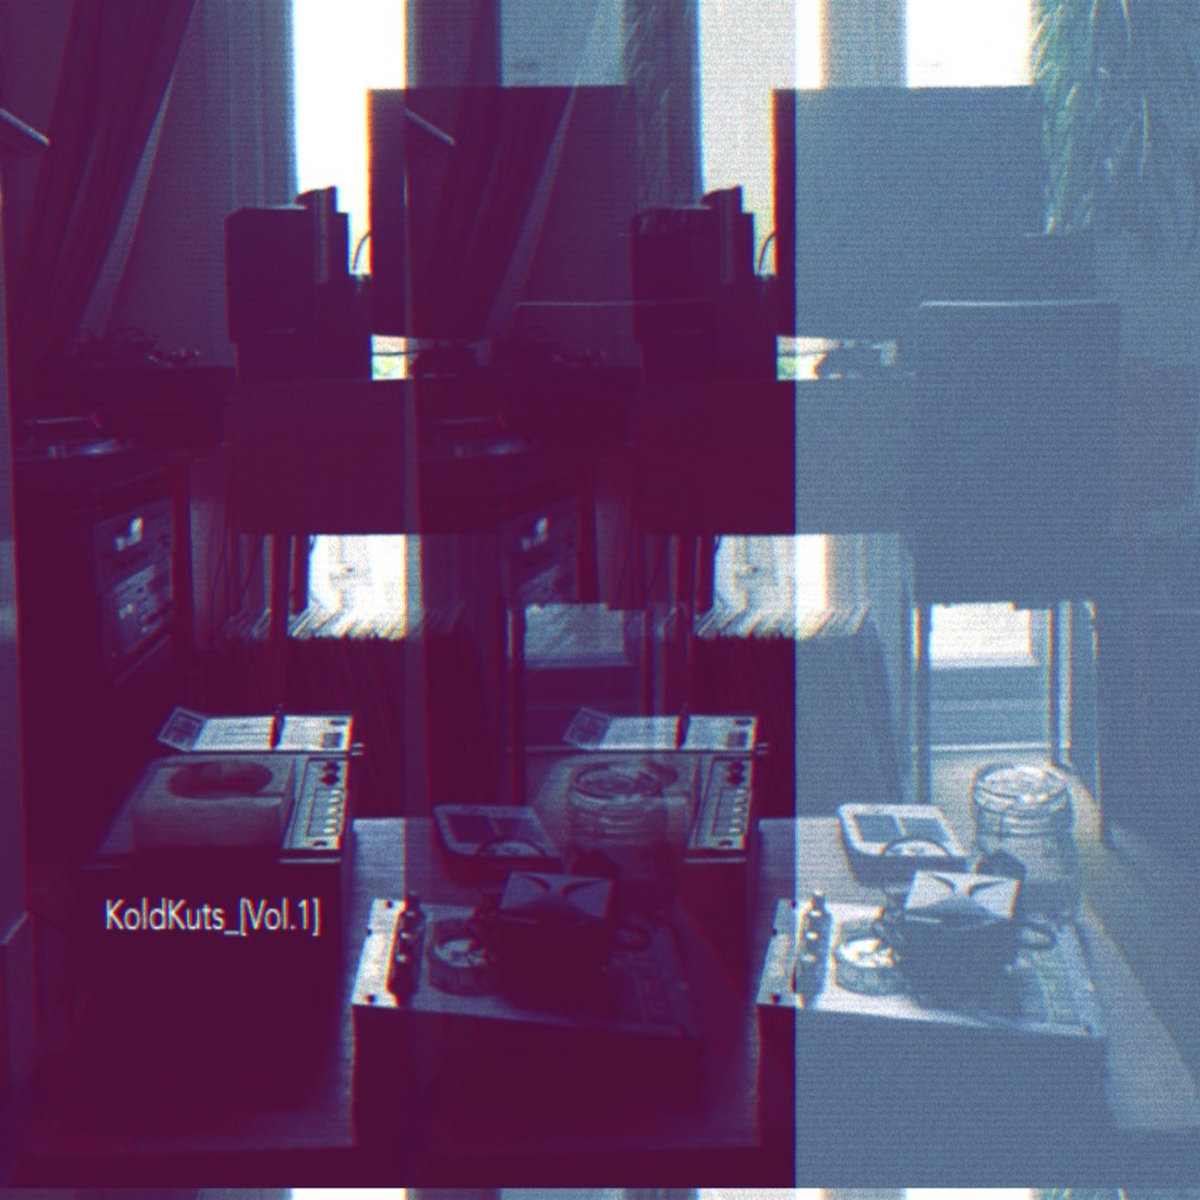 Listen To Three Beat Tapes From [klsr] In "KoldKuts, Vol. 1" / "h∆rtEP" / "Kome_Around" (Release)